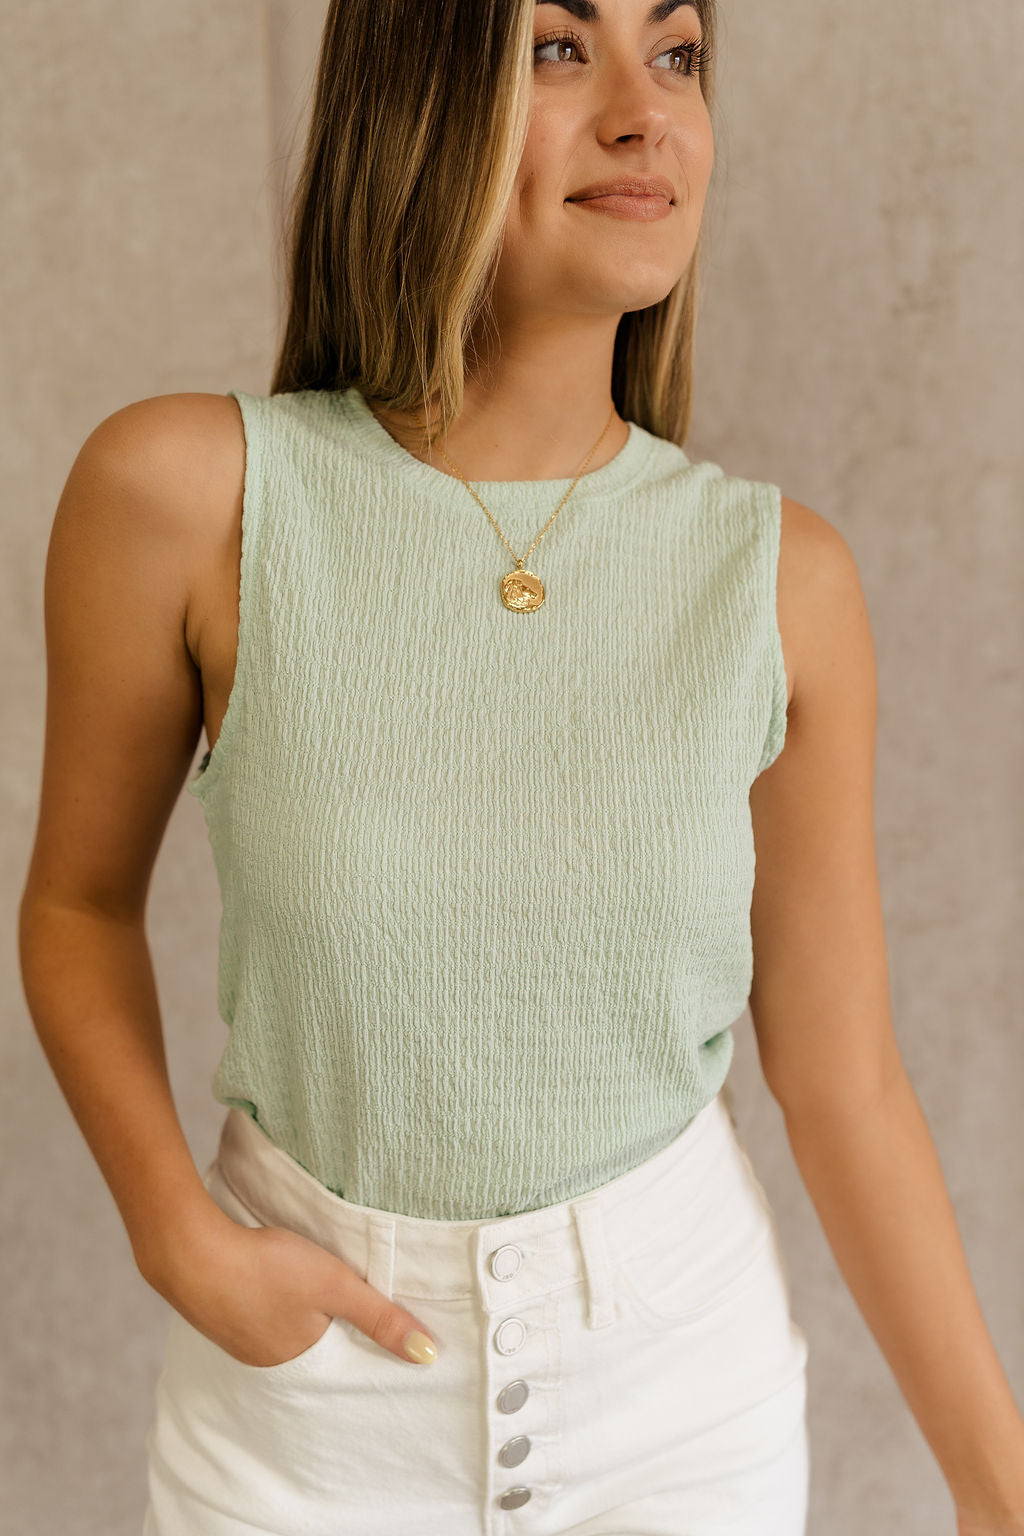 Front view of female model wearing the Kimber Mint Textured Tank that features mint green textured fabric, sleeveless body, and round neck. Tank is tucked into white shorts.